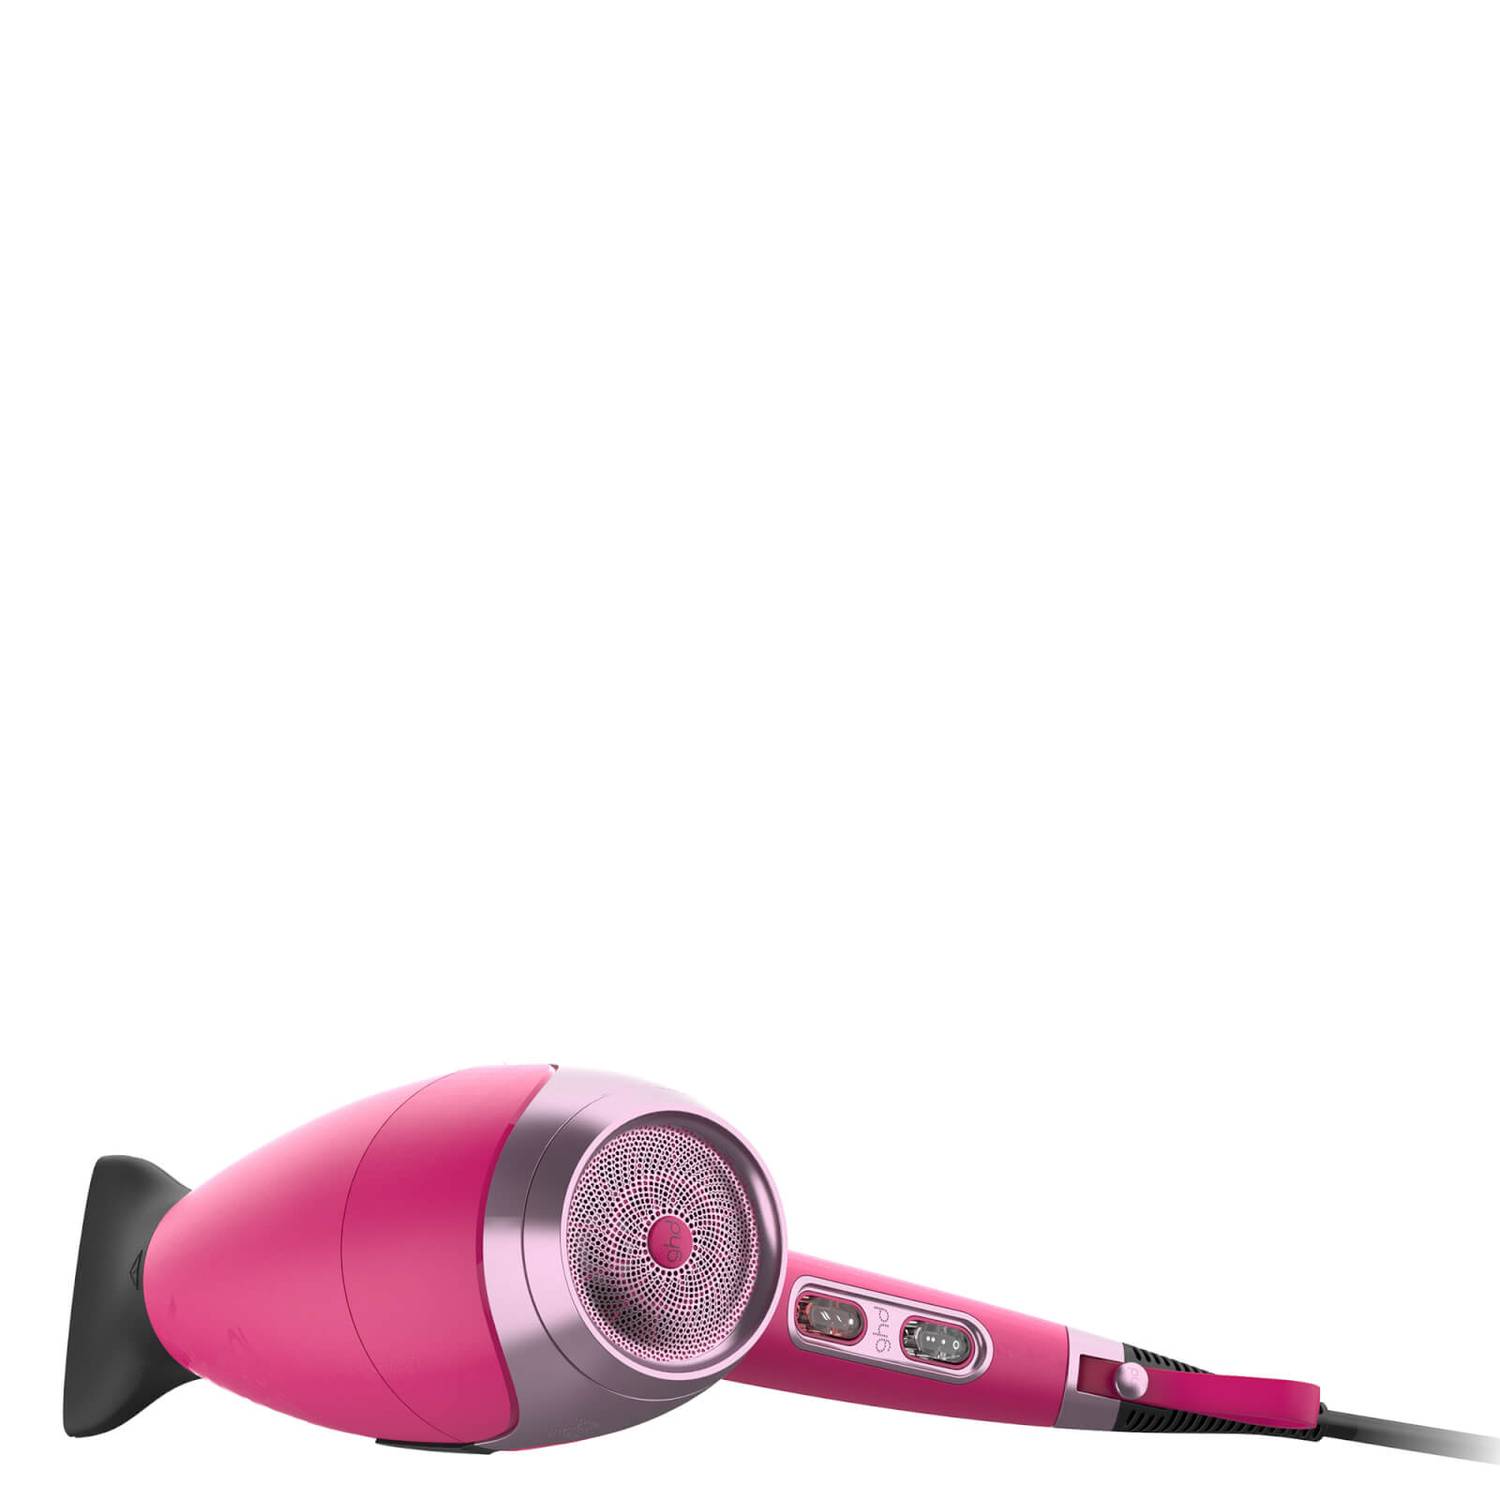 ghd Helios 1875W Advanced Professional Dryer in Orchid Pink - Blend Box